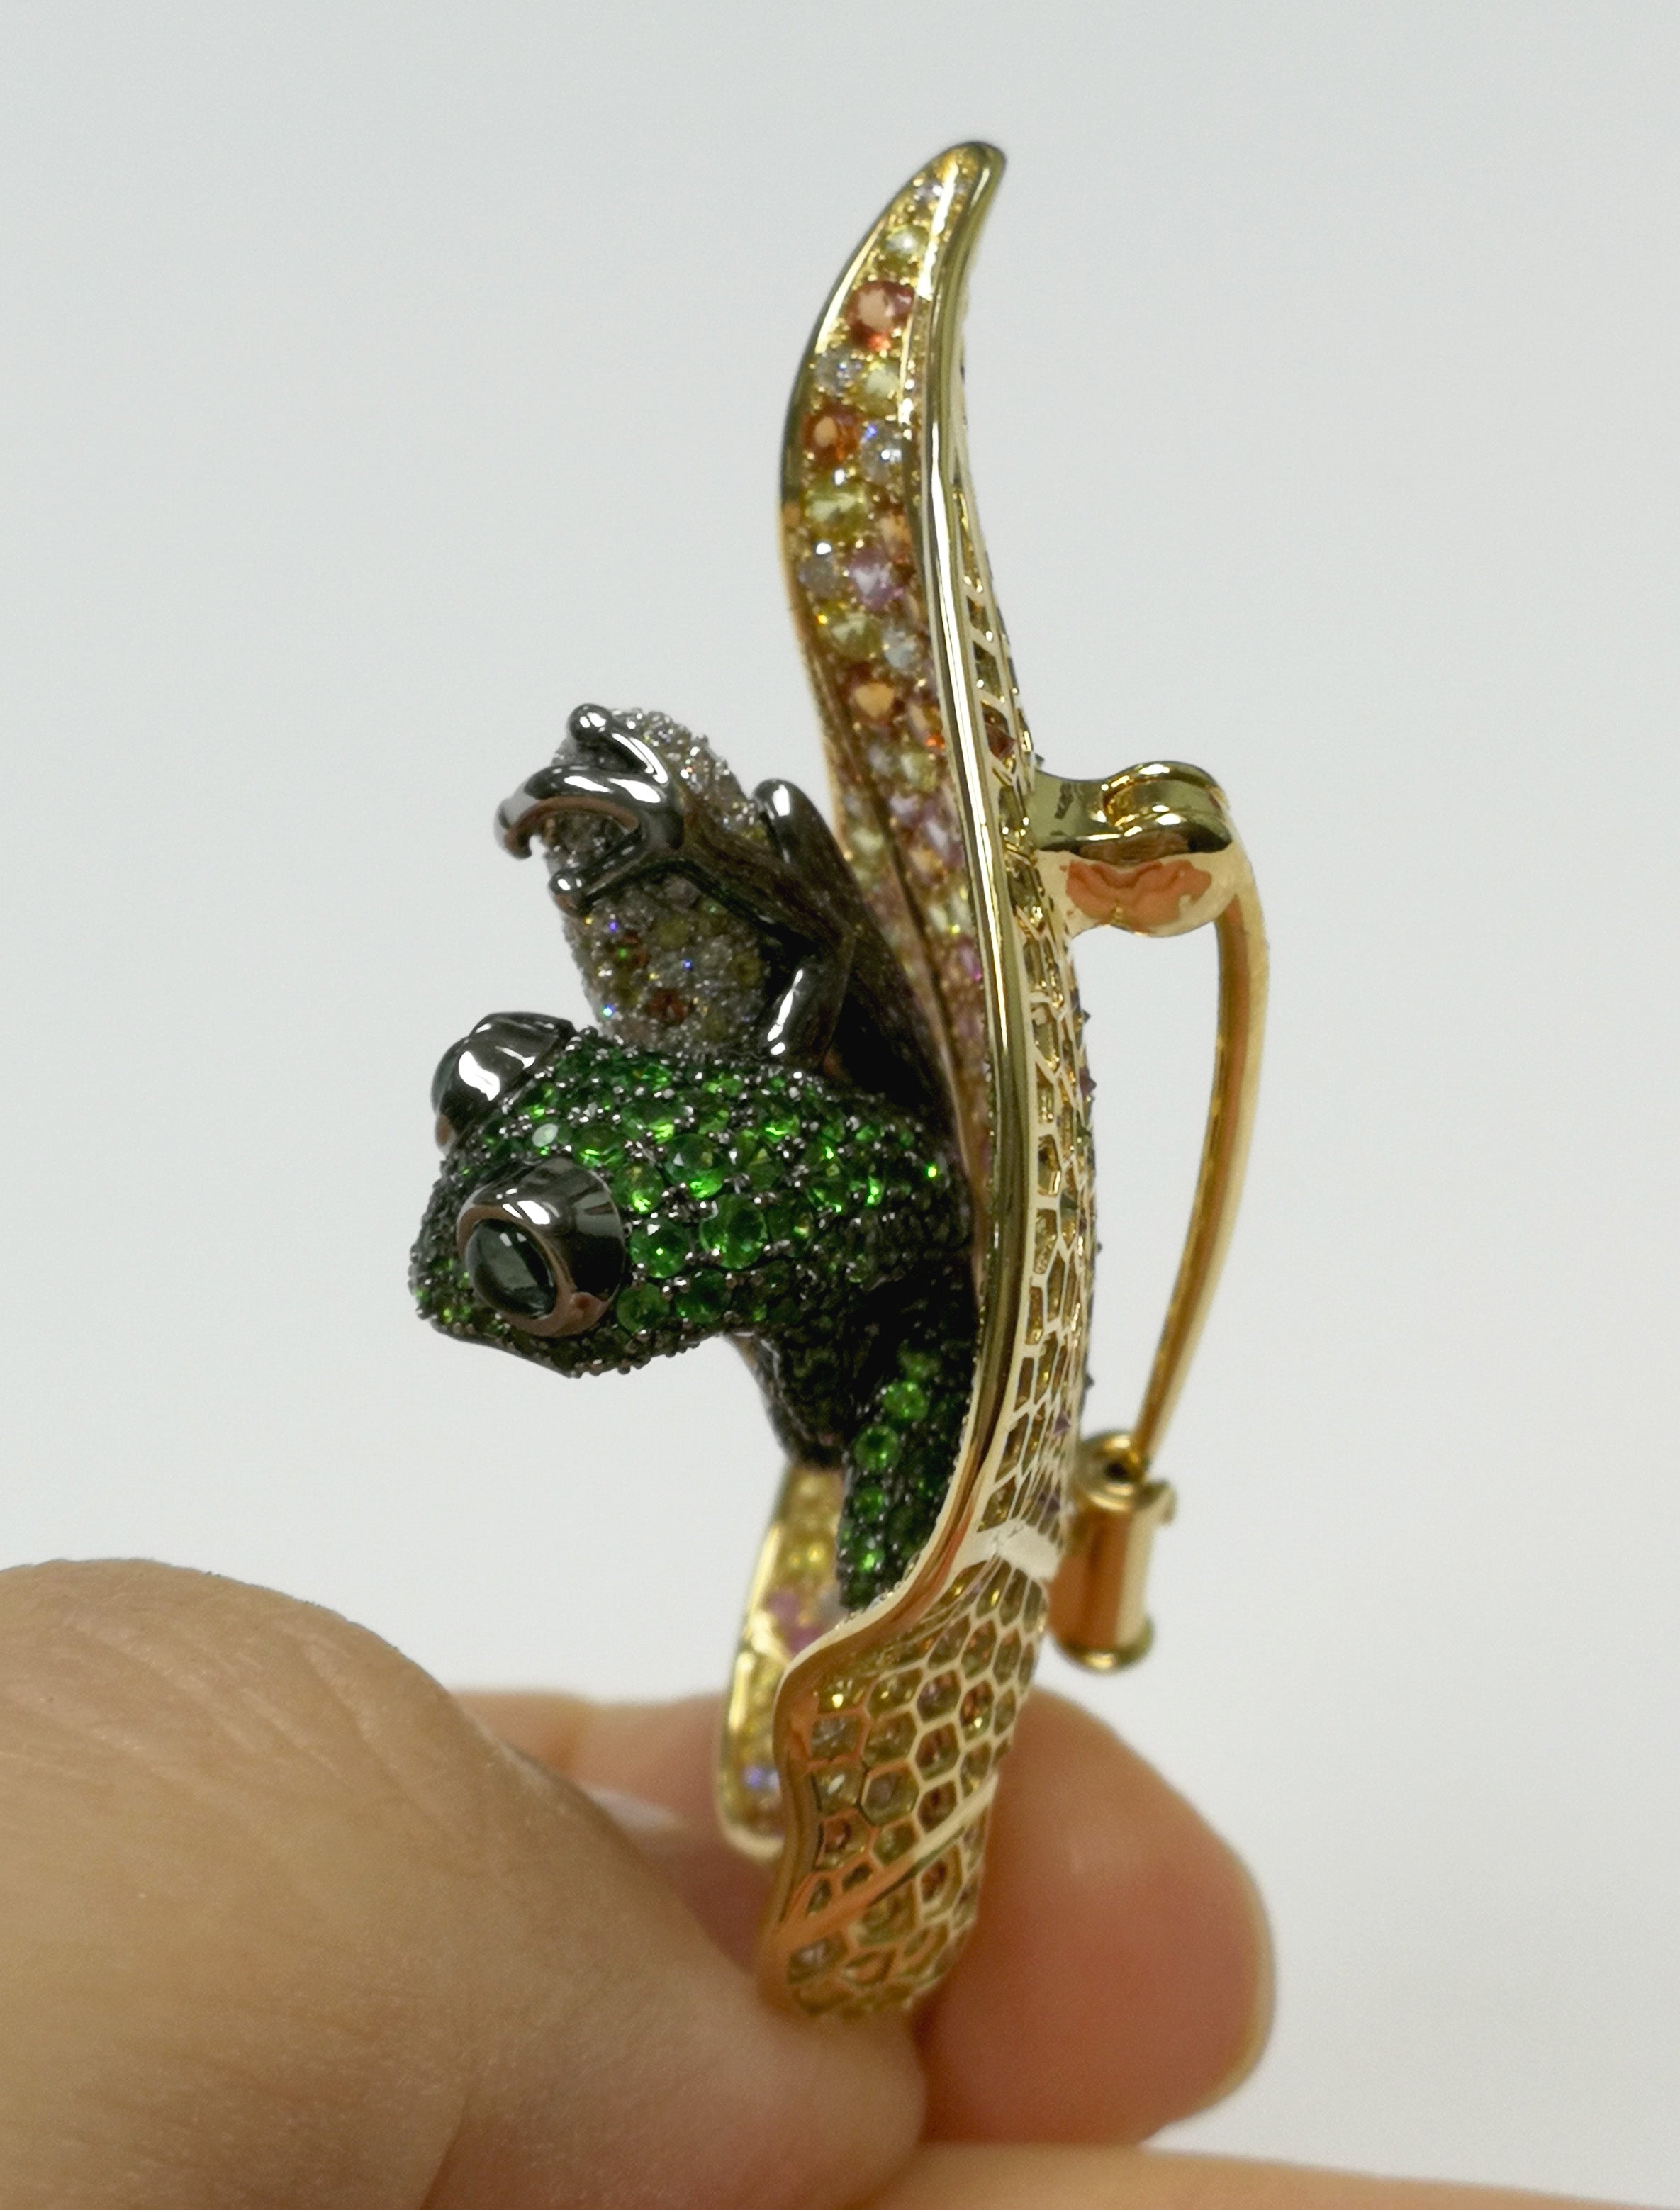 Brs 0179-0, 18K Yellow and White Gold, Multi-Color Sapphires, Diamonds Frog Brooch